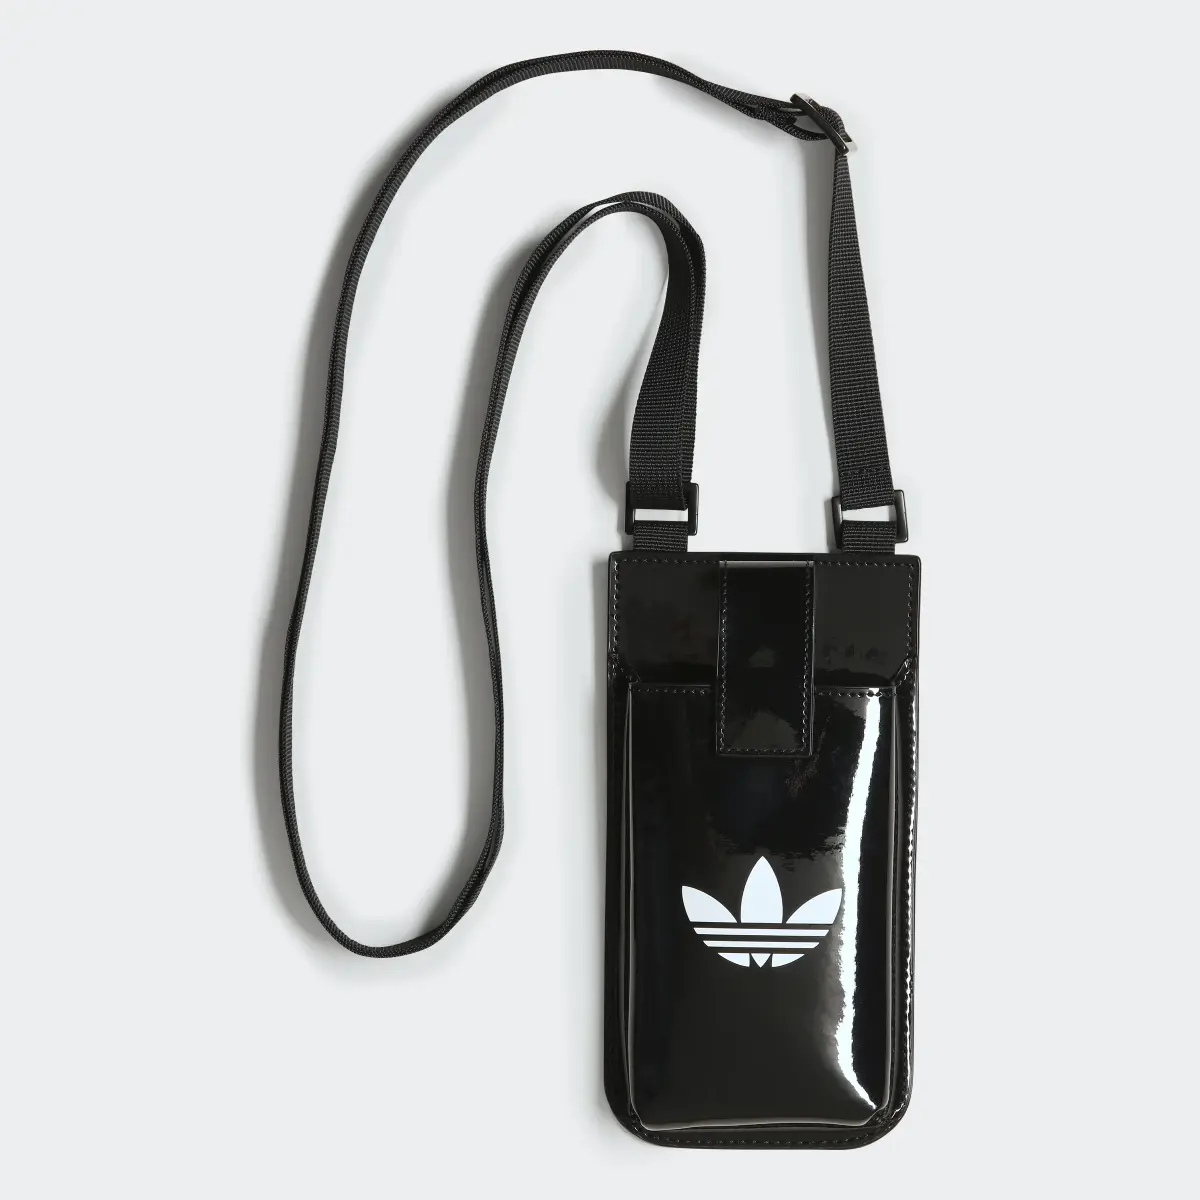 Adidas Universal Pouch. 2